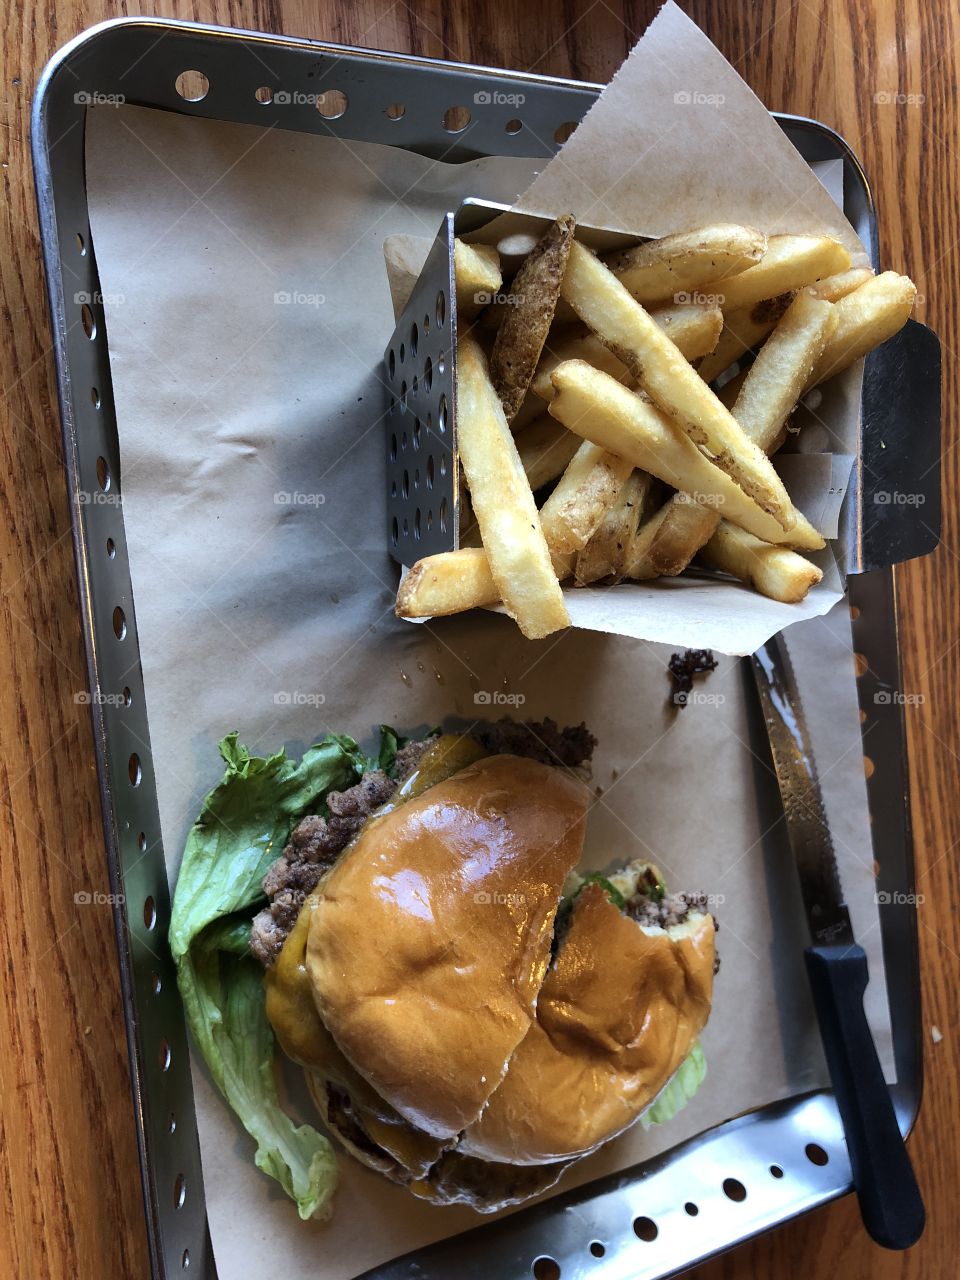 Lunch date with a burger and a basket of fries. 